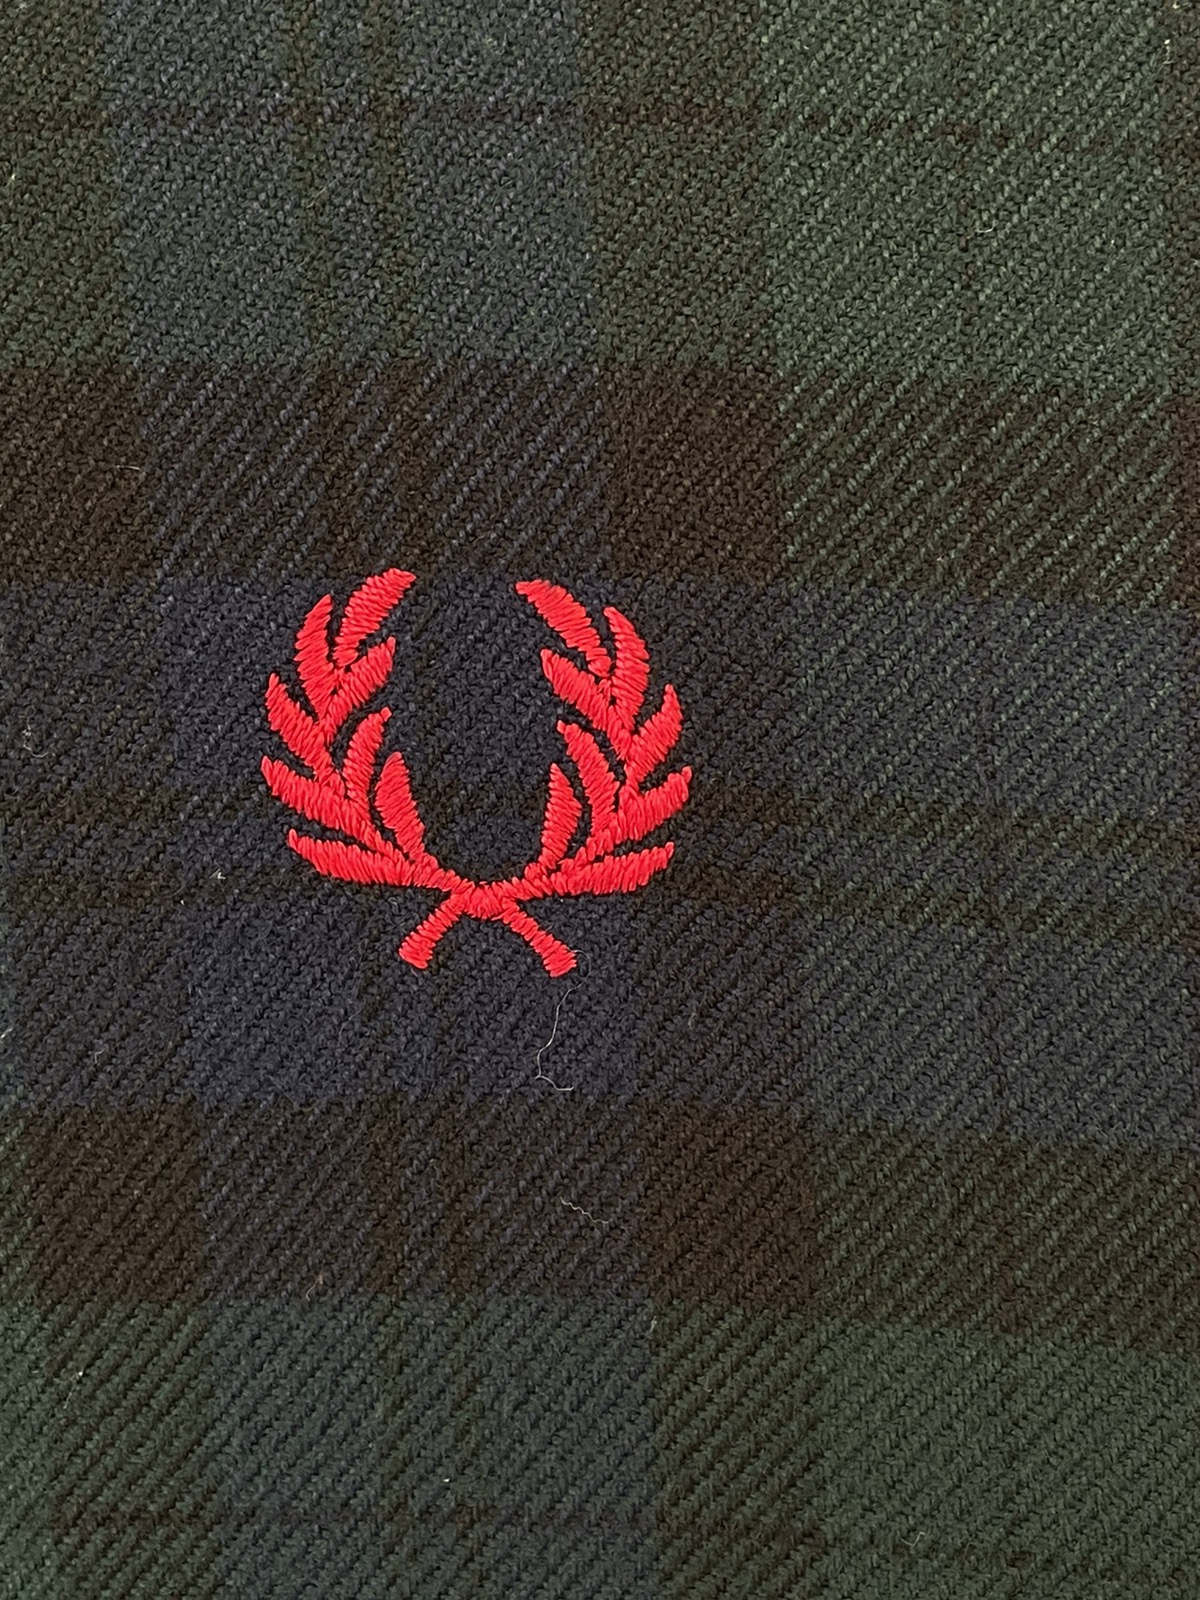 FRED PERRY REVERSIBLE JACKET - 15